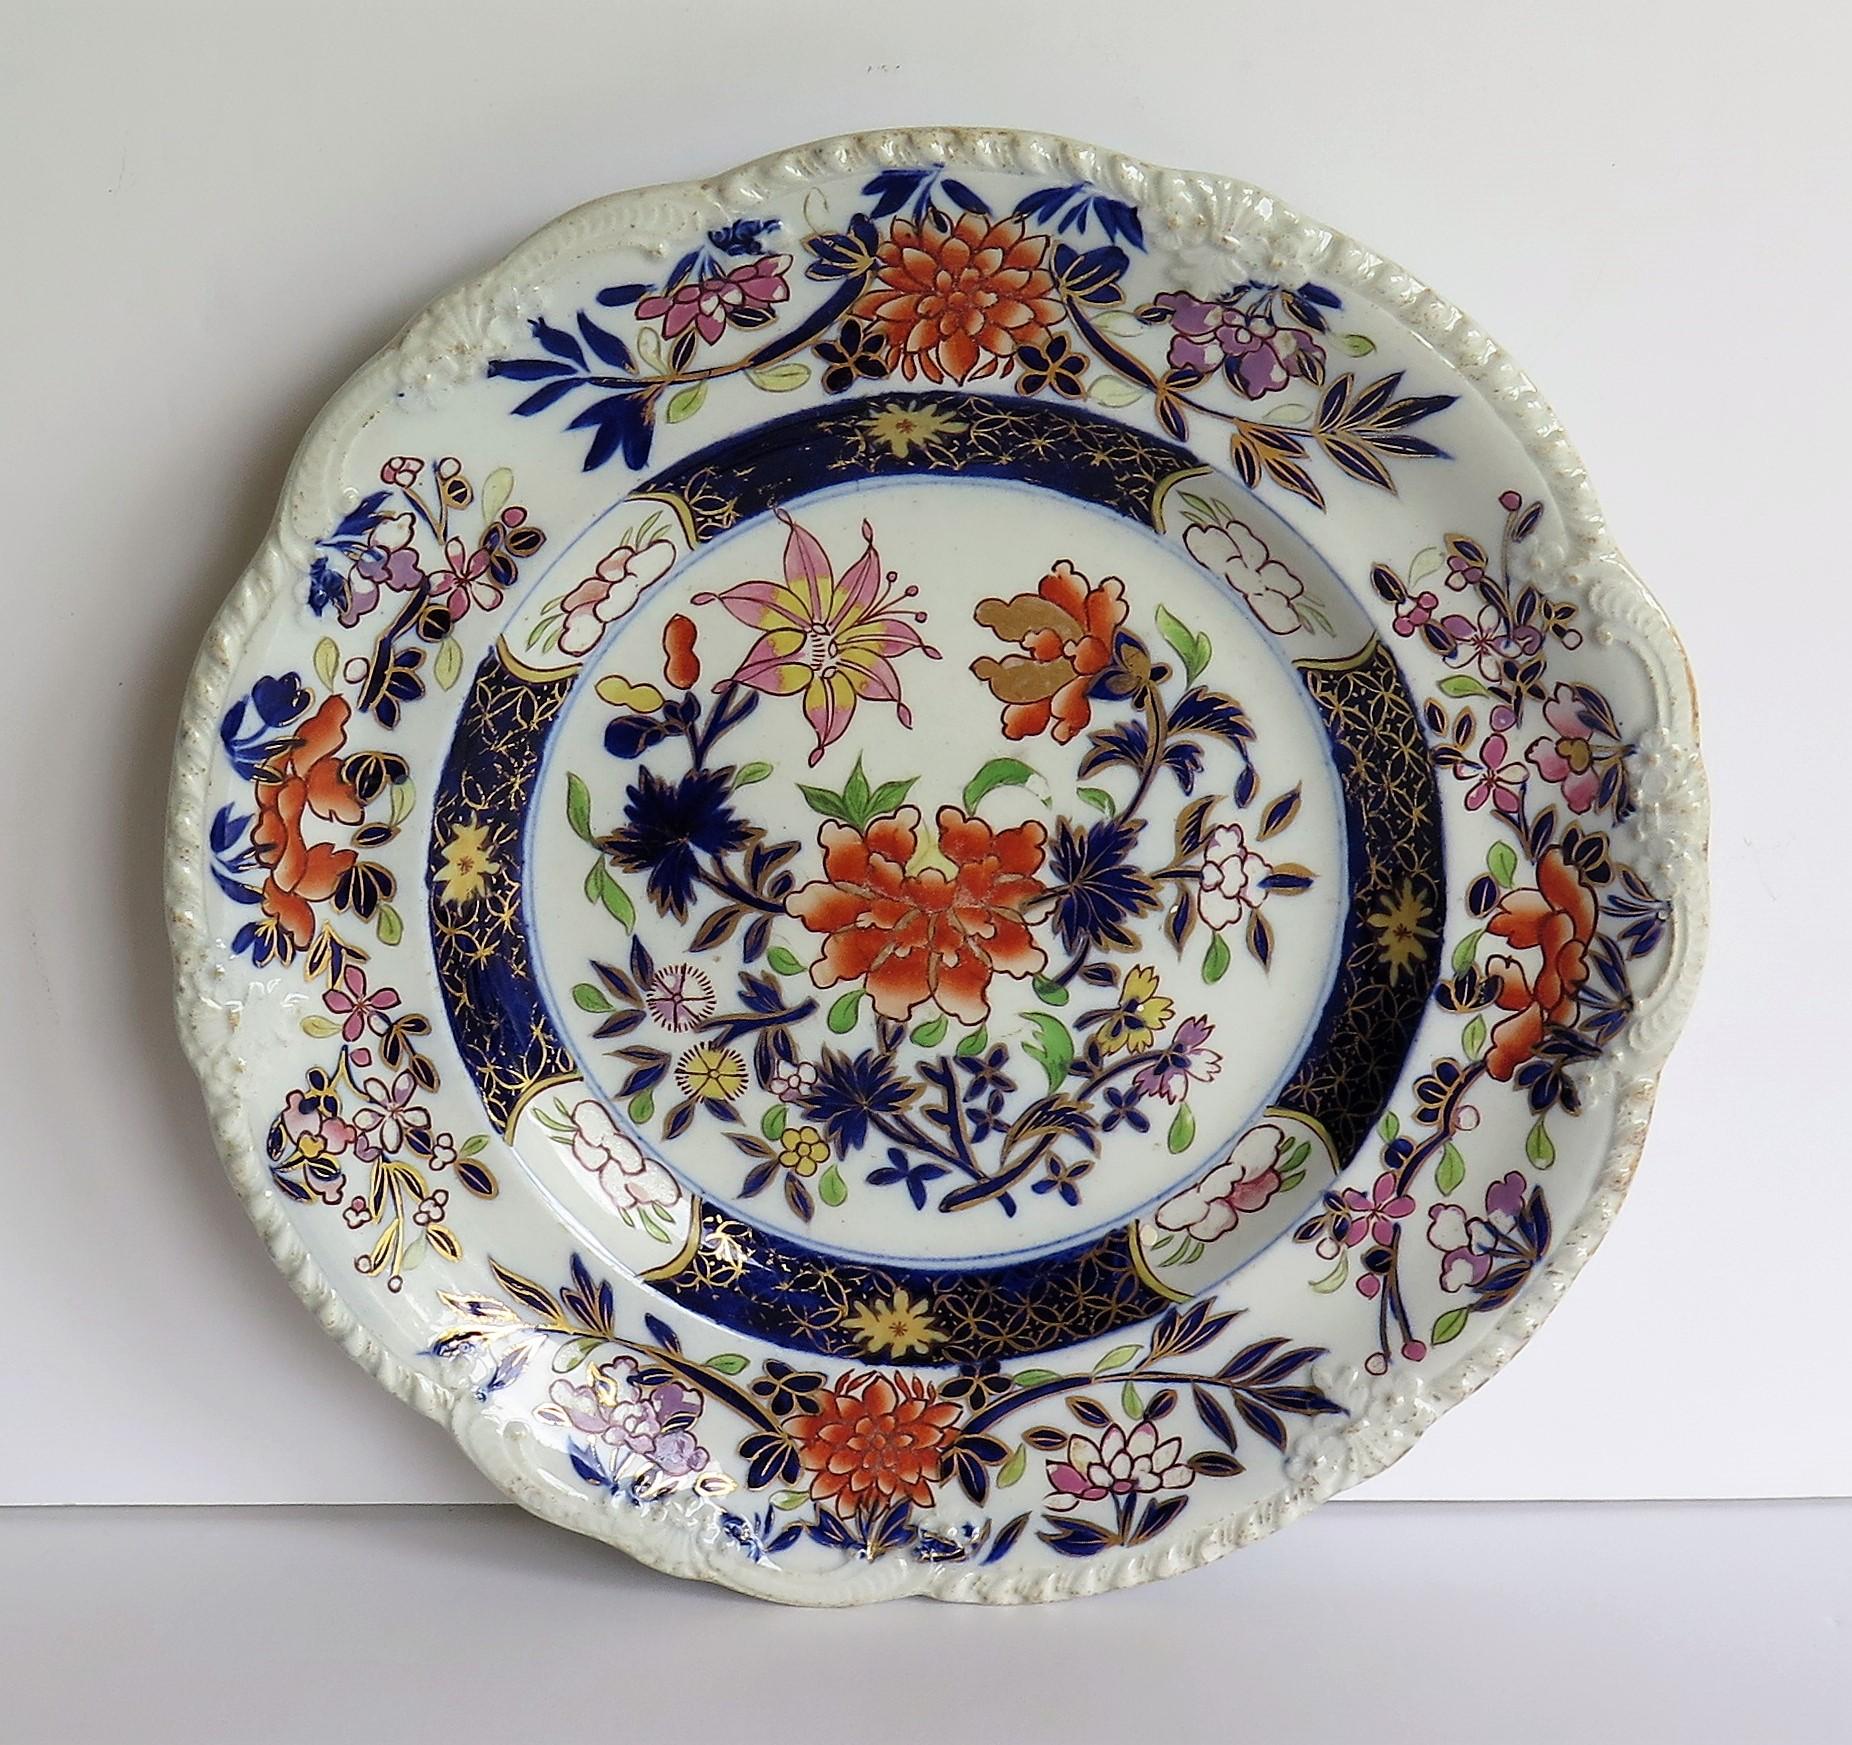 This is a very decorative Mason's Ironstone pottery Desert Plate produced by the Mason's factory at Lane Delph, Staffordshire, England, circa 1815-1820.

The plate is circular with a shaped rim having a moulded edge design.

The plate is